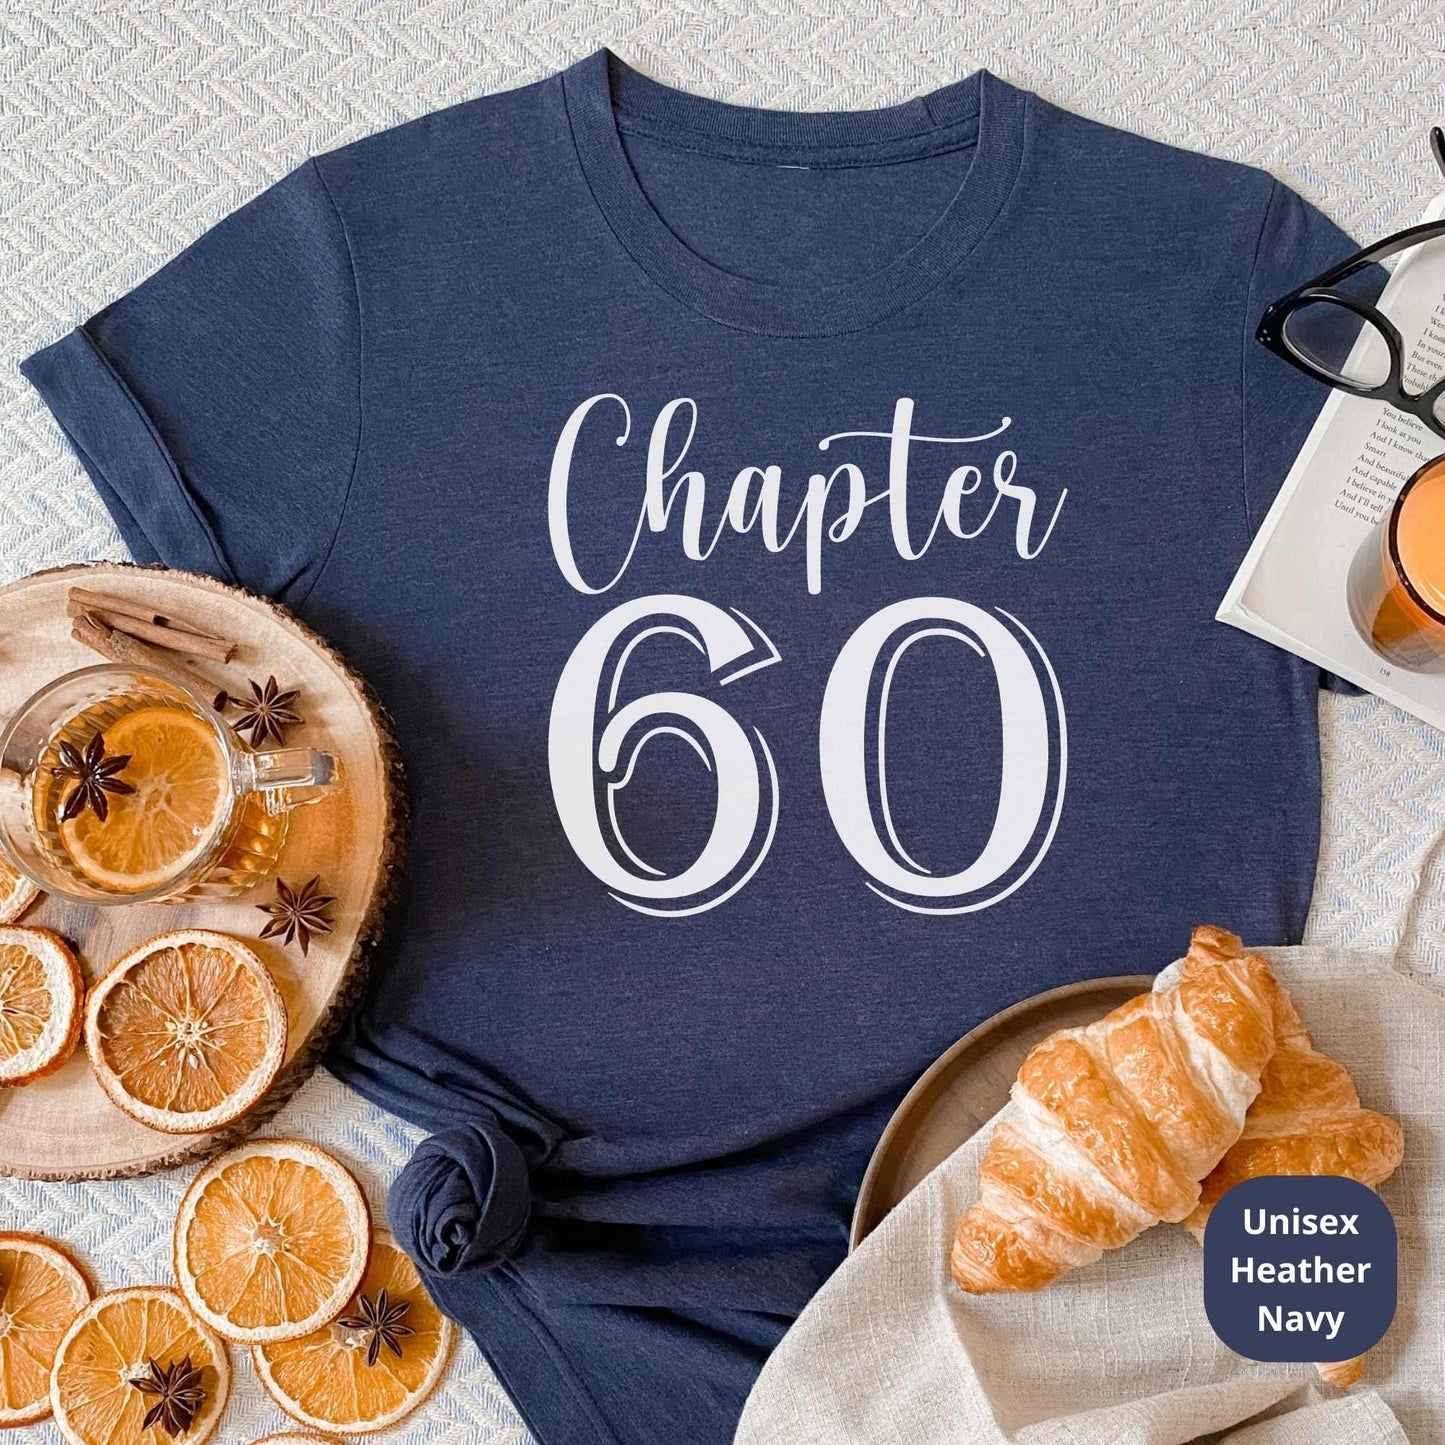 60th Birthday Shirt, Chapter 60 Birthday Gift, Great for Grands, Parents, Aunt, Cousins & Loved Ones Bday Party or Anniversary Celebration